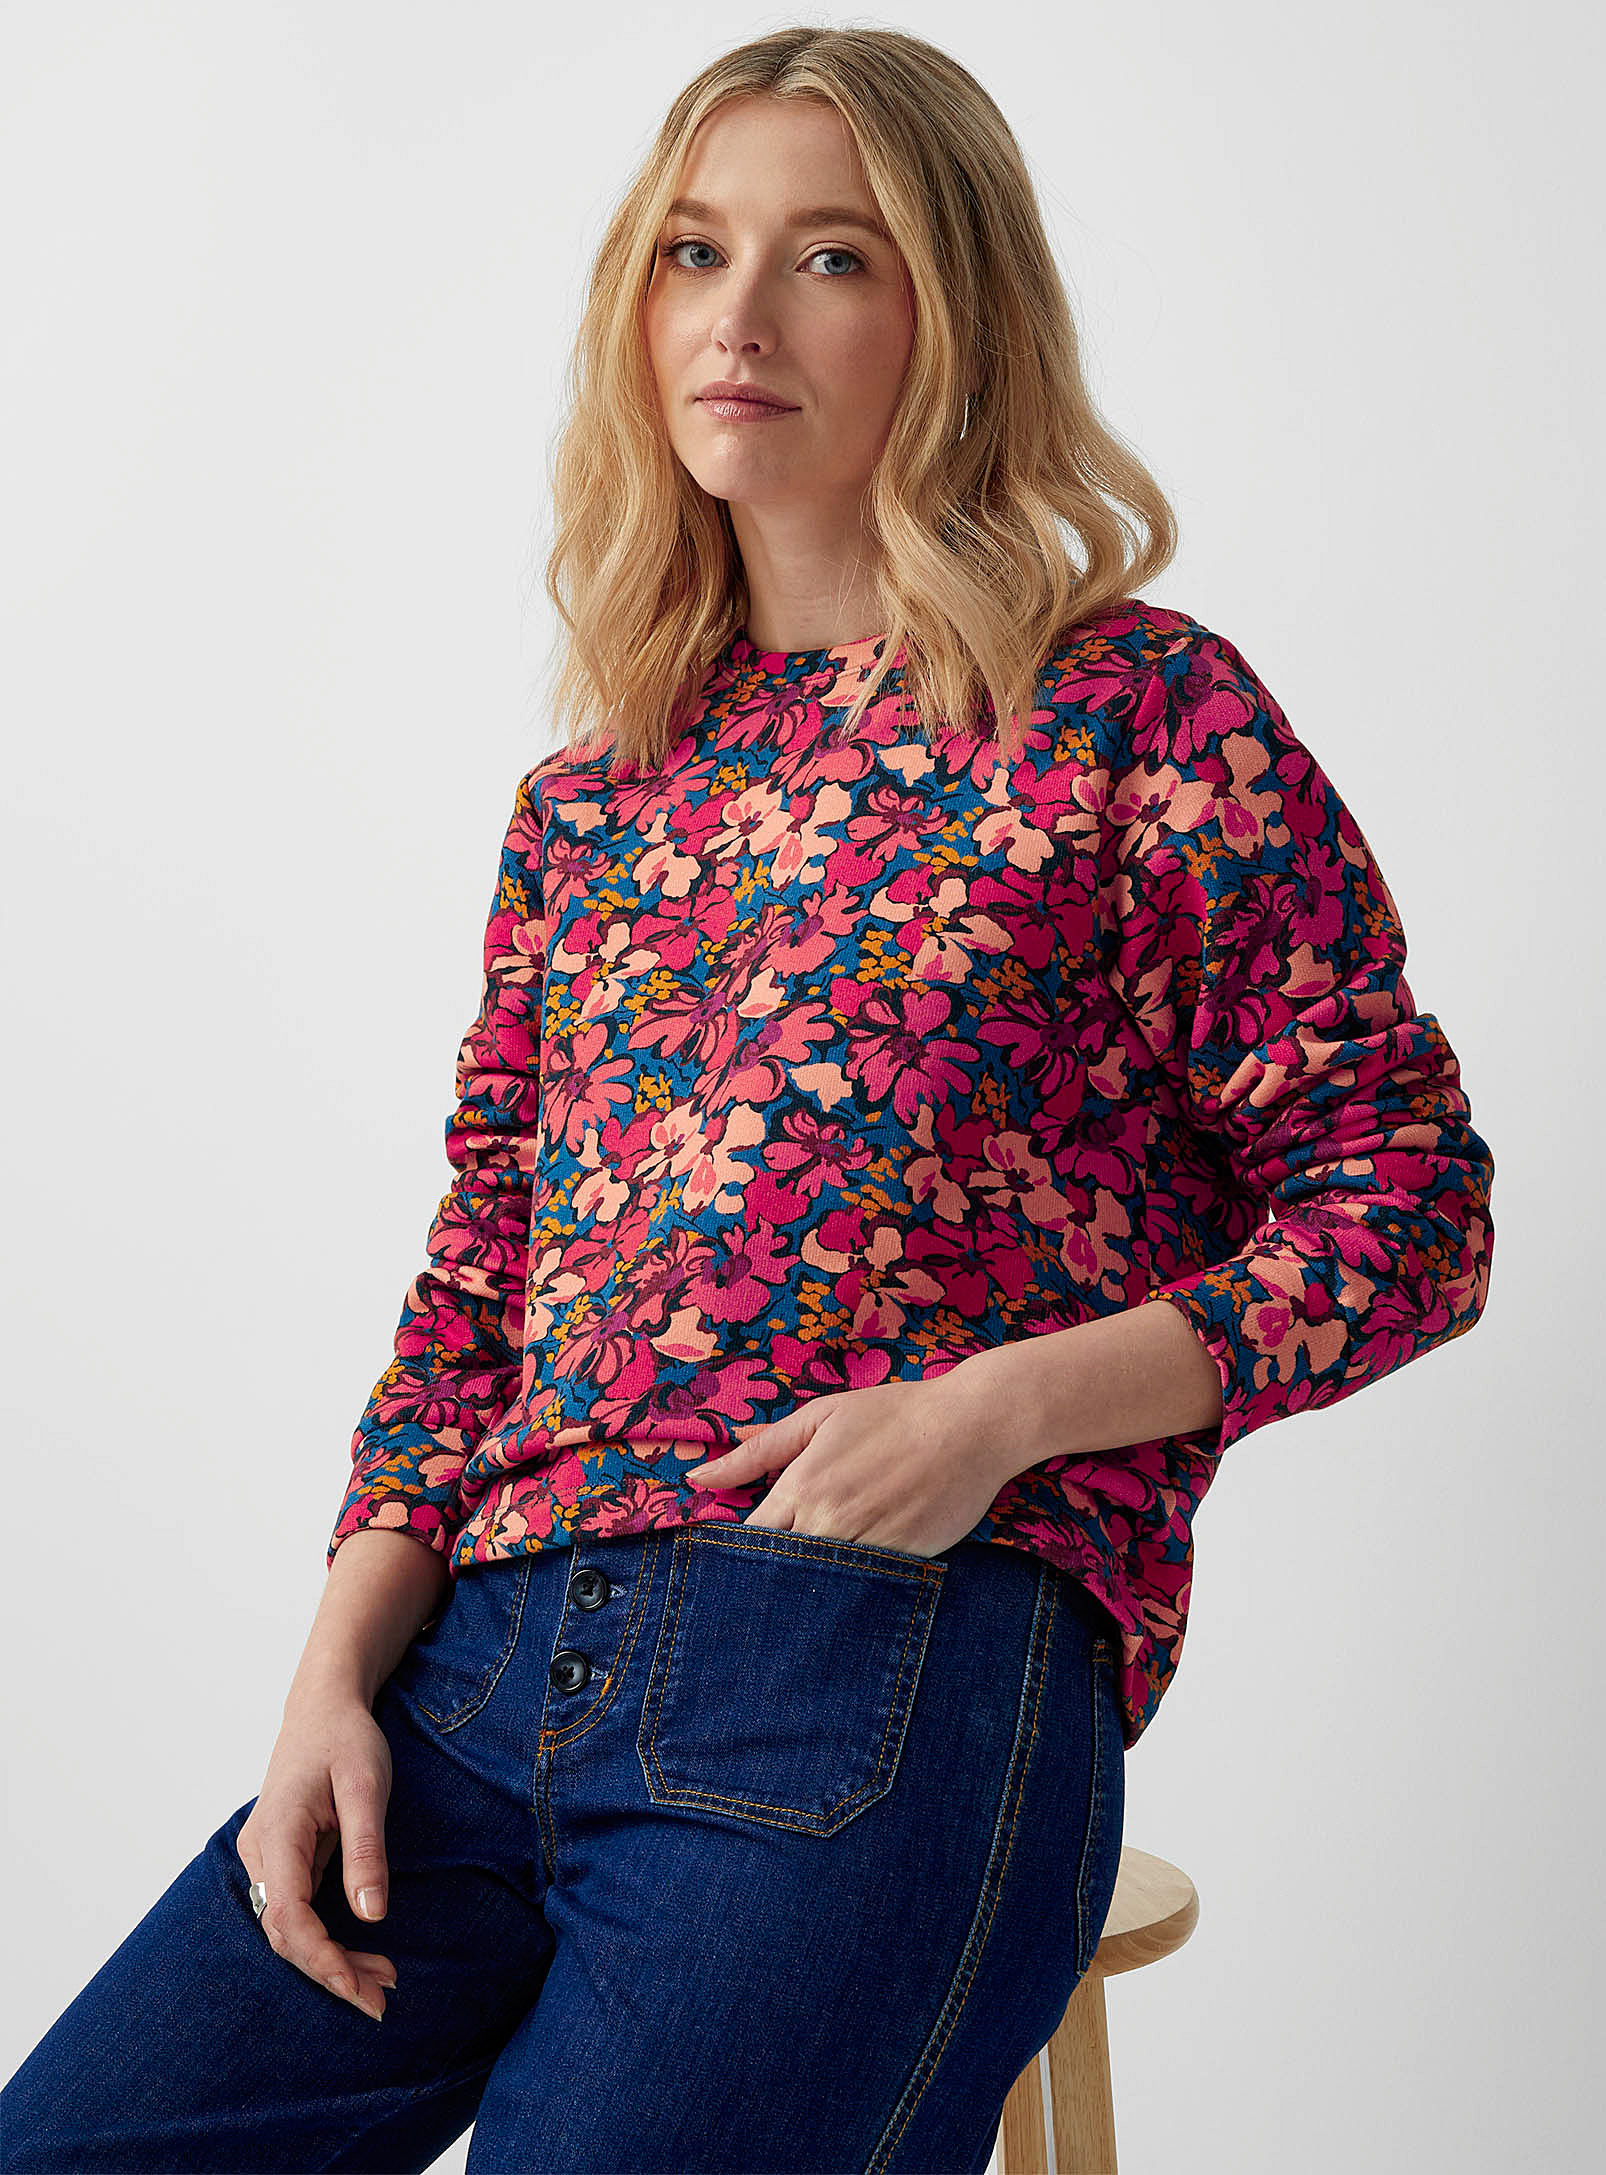 Contemporaine Enchanted Garden Sweatshirt Made With Liberty Fabric In Patterned Red